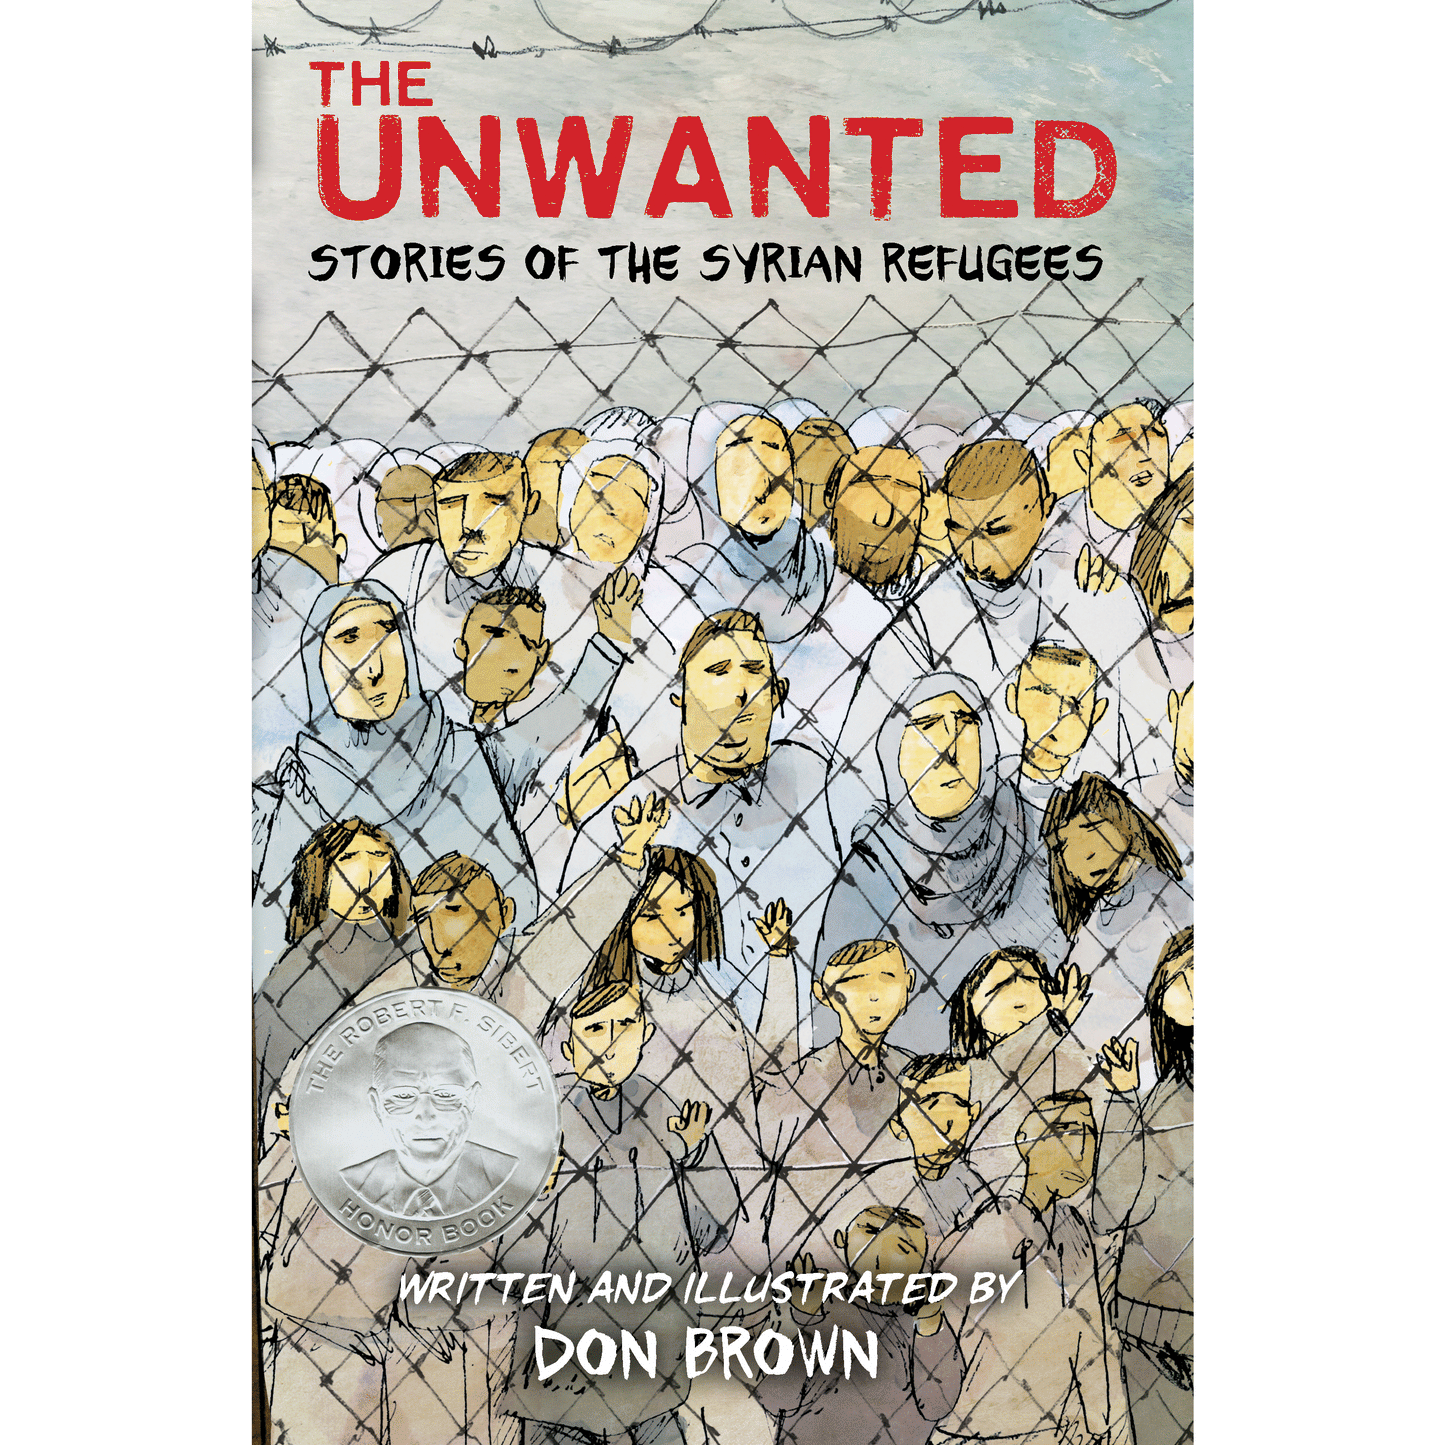 The Unwanted- Stories of the Syrian Refugees